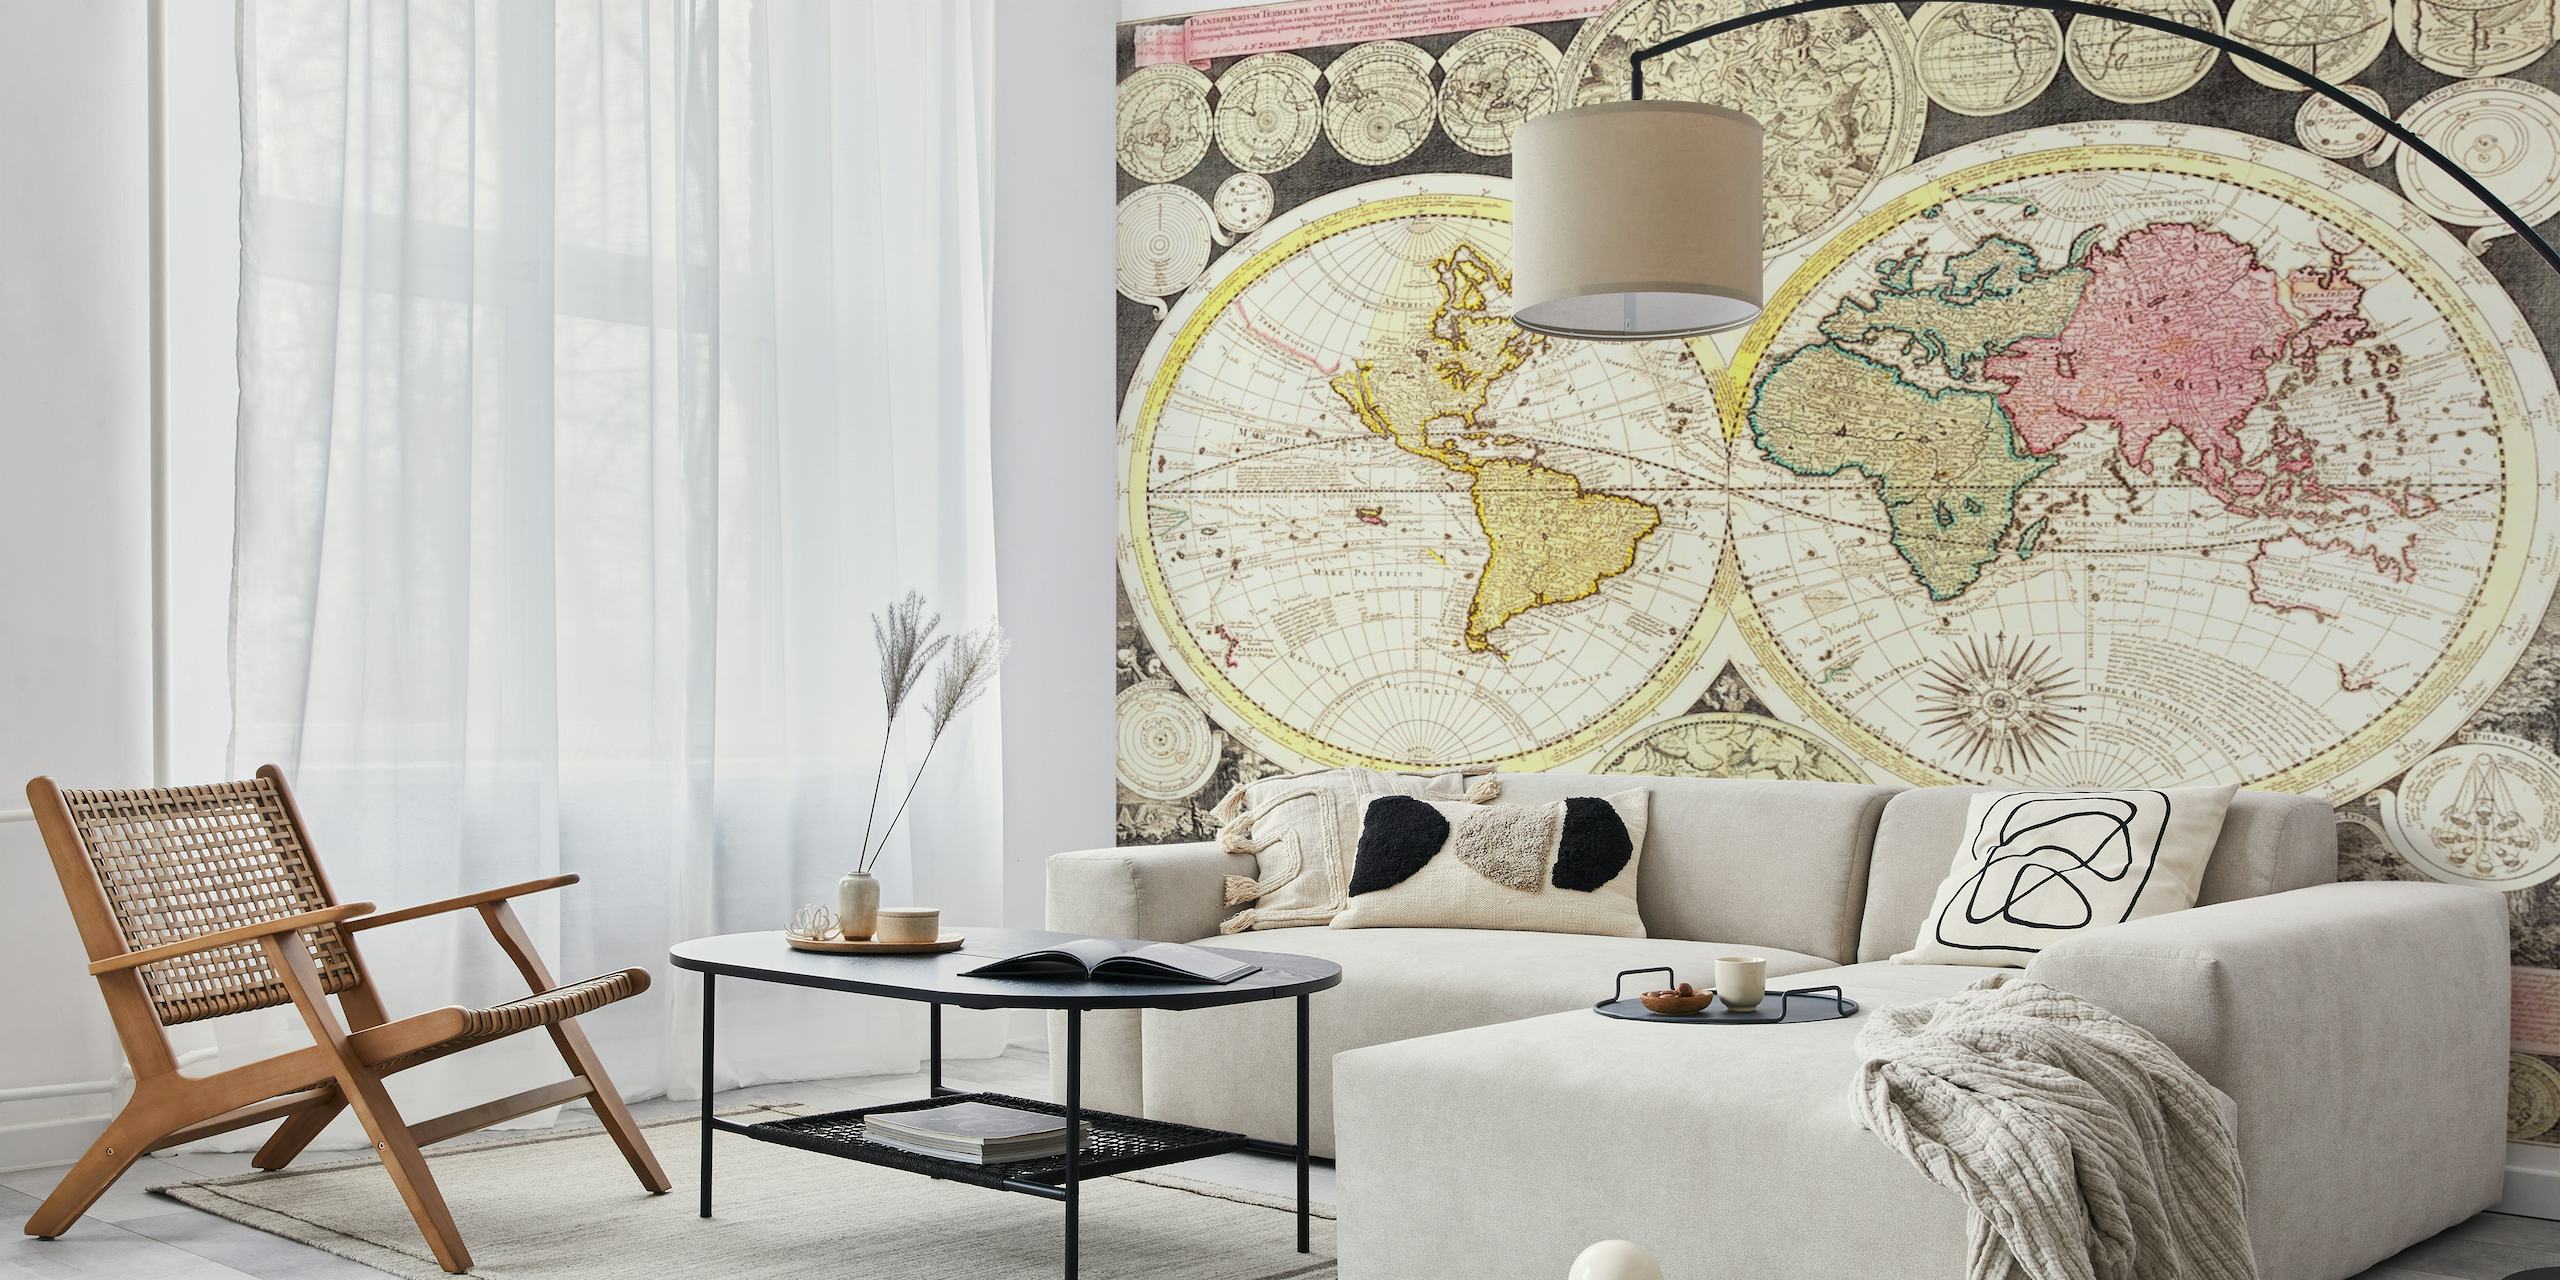 Antique twin-hemisphere world map wall mural with vintage colors and decorative border details